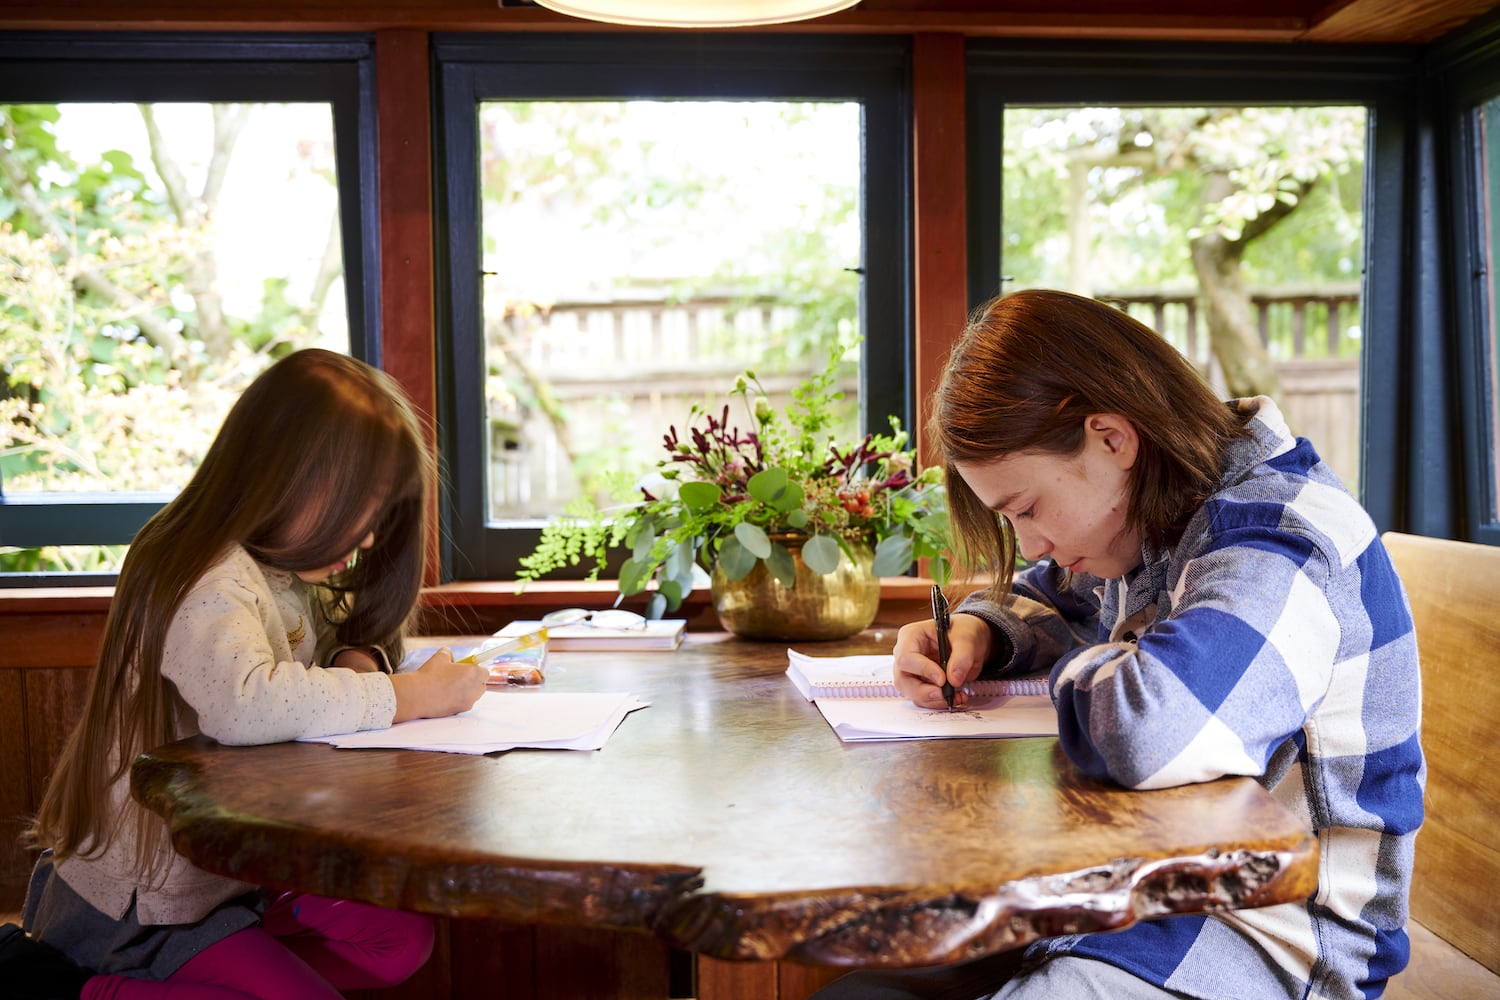 Children sit and draw at a creative live edge kitchen nook countertop table